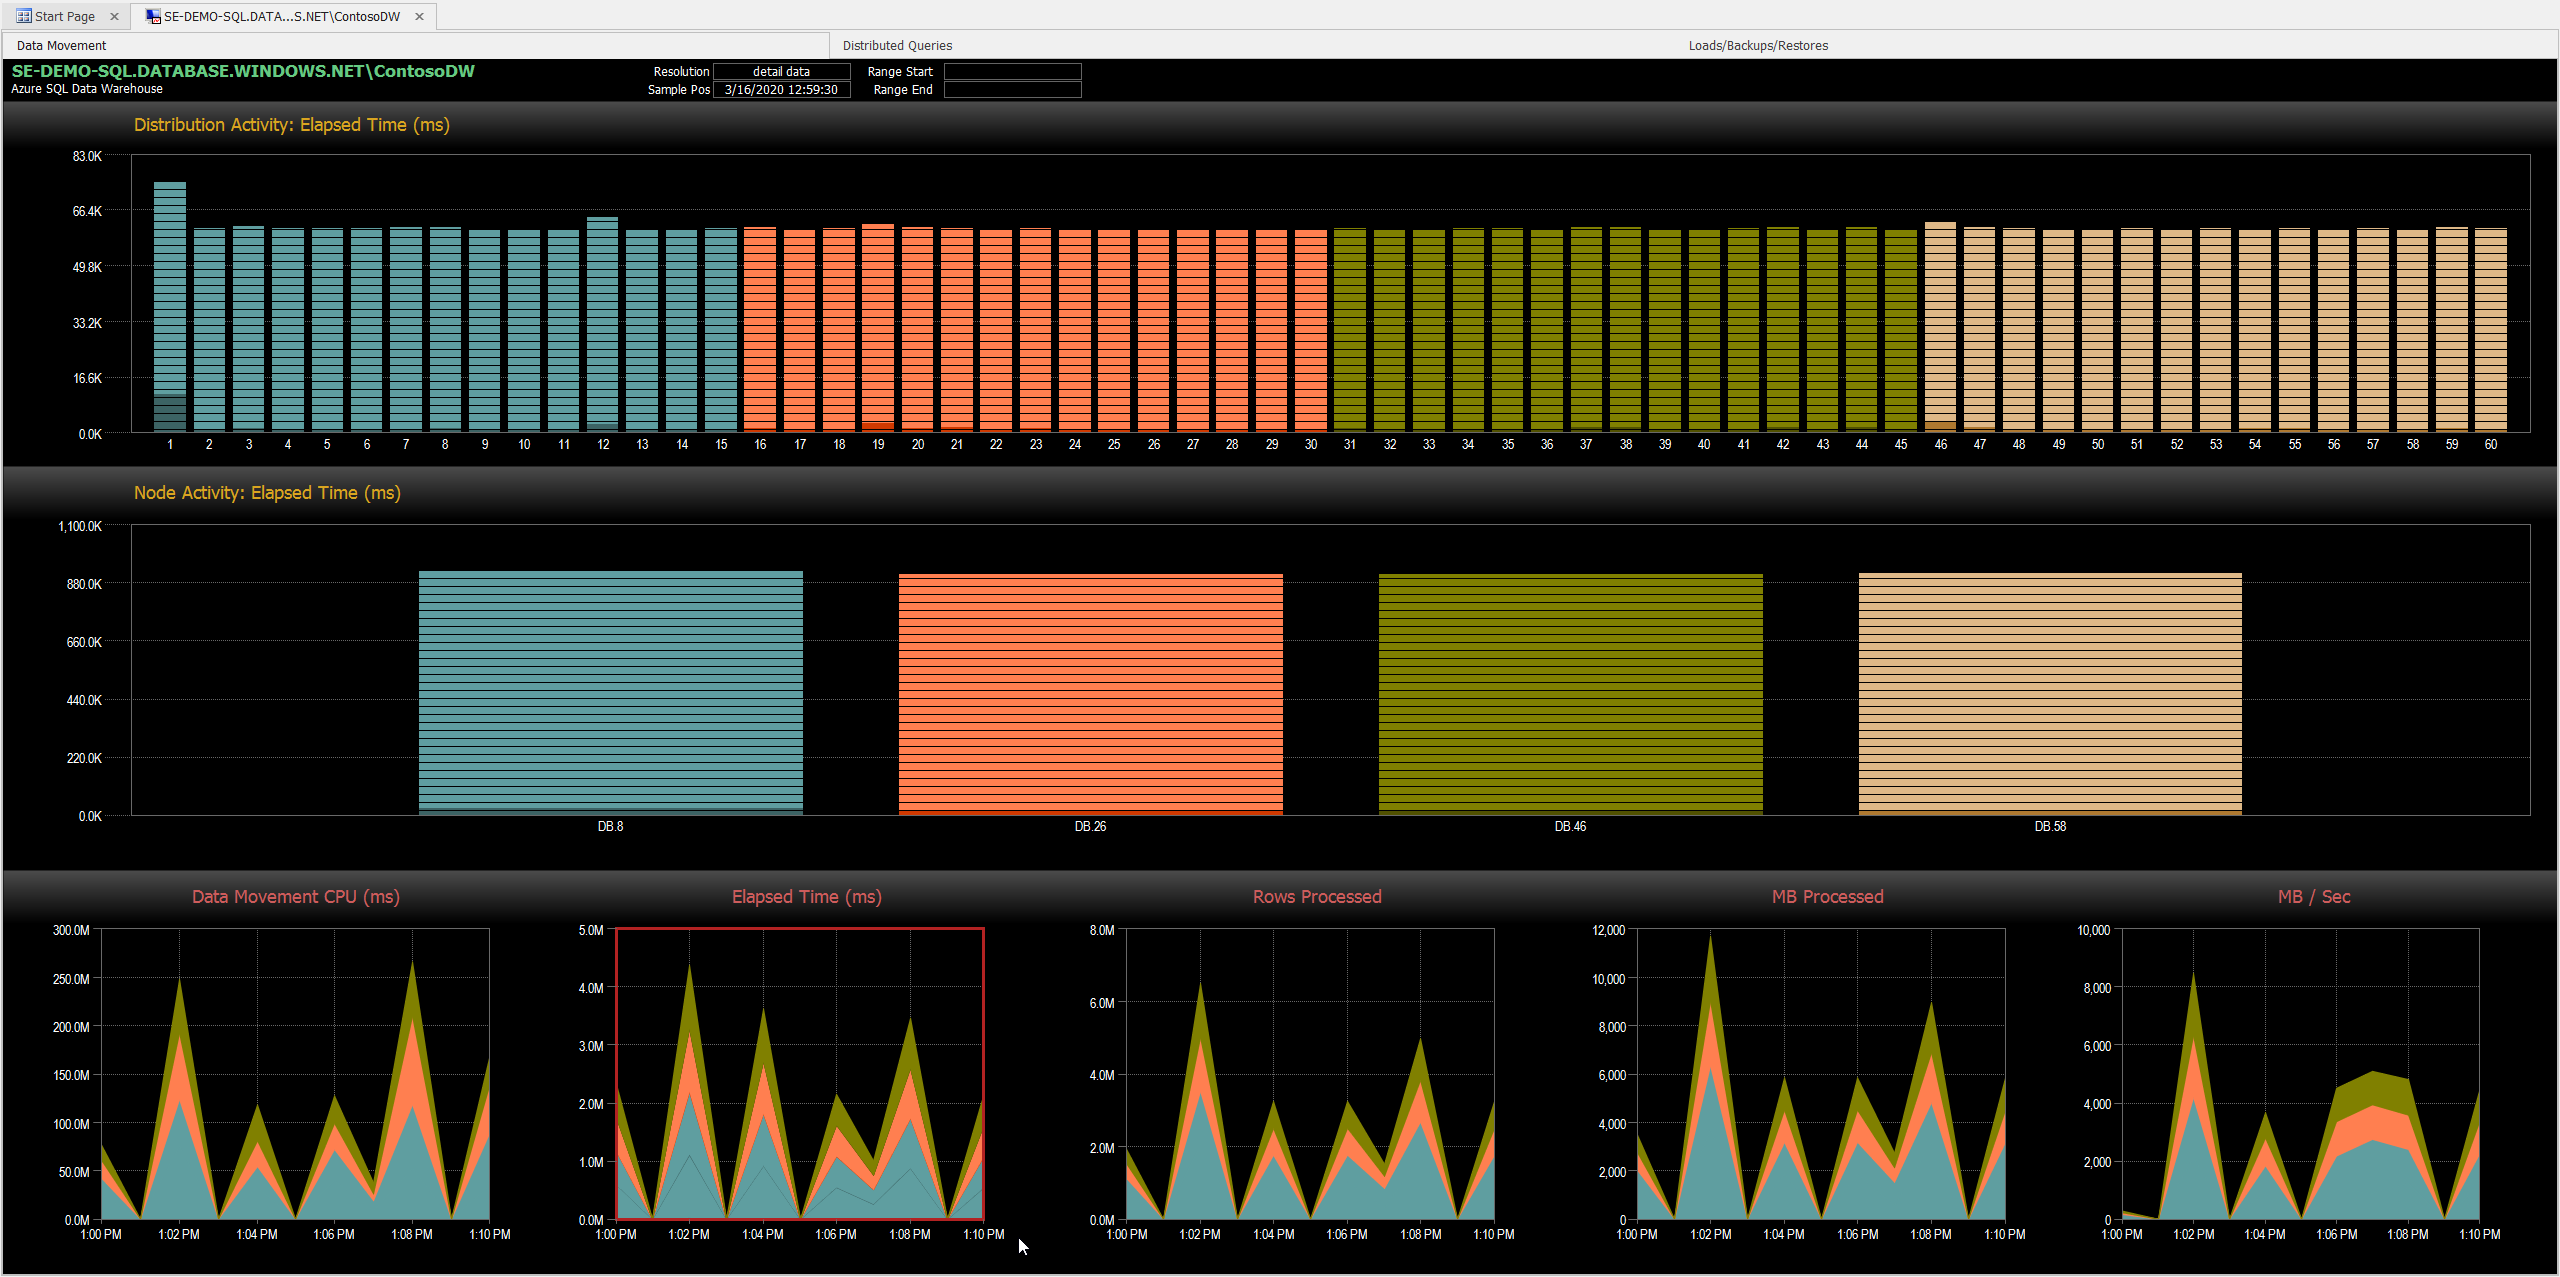 DW Sentry Data Movement Dashboard selected timeframe